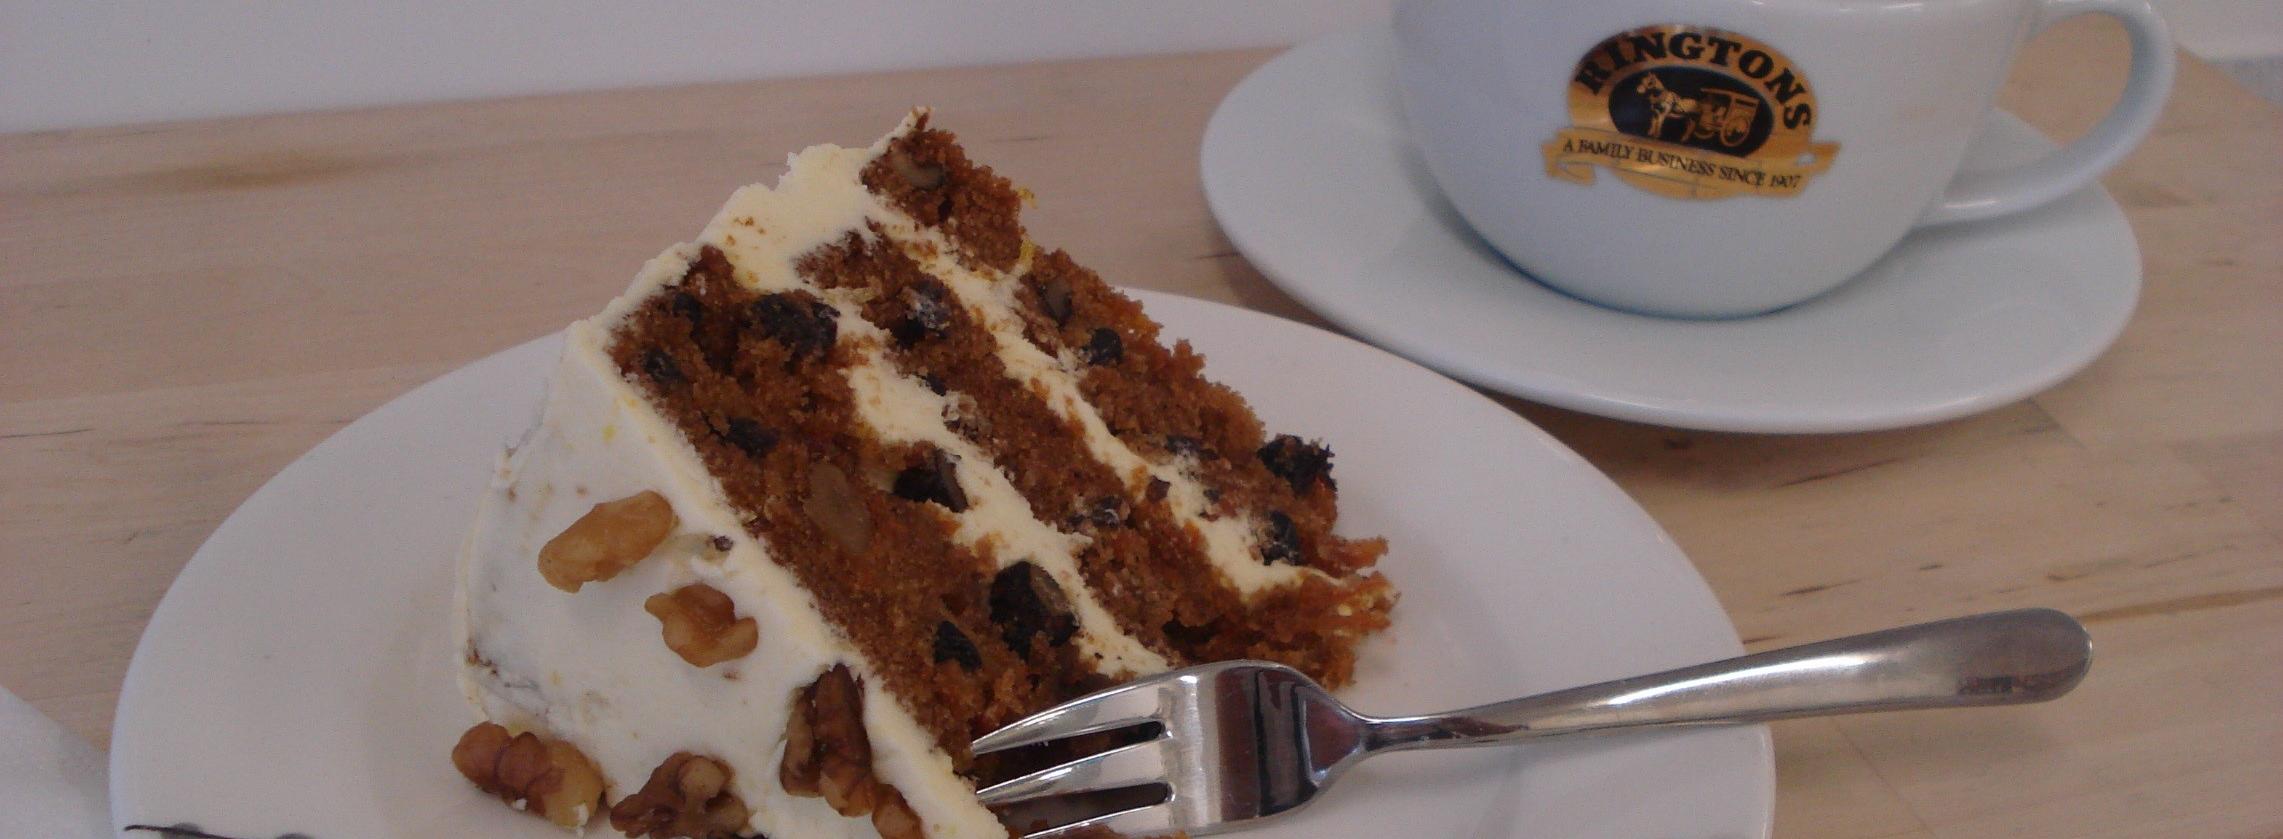 Photo of carrot cake and coffee 